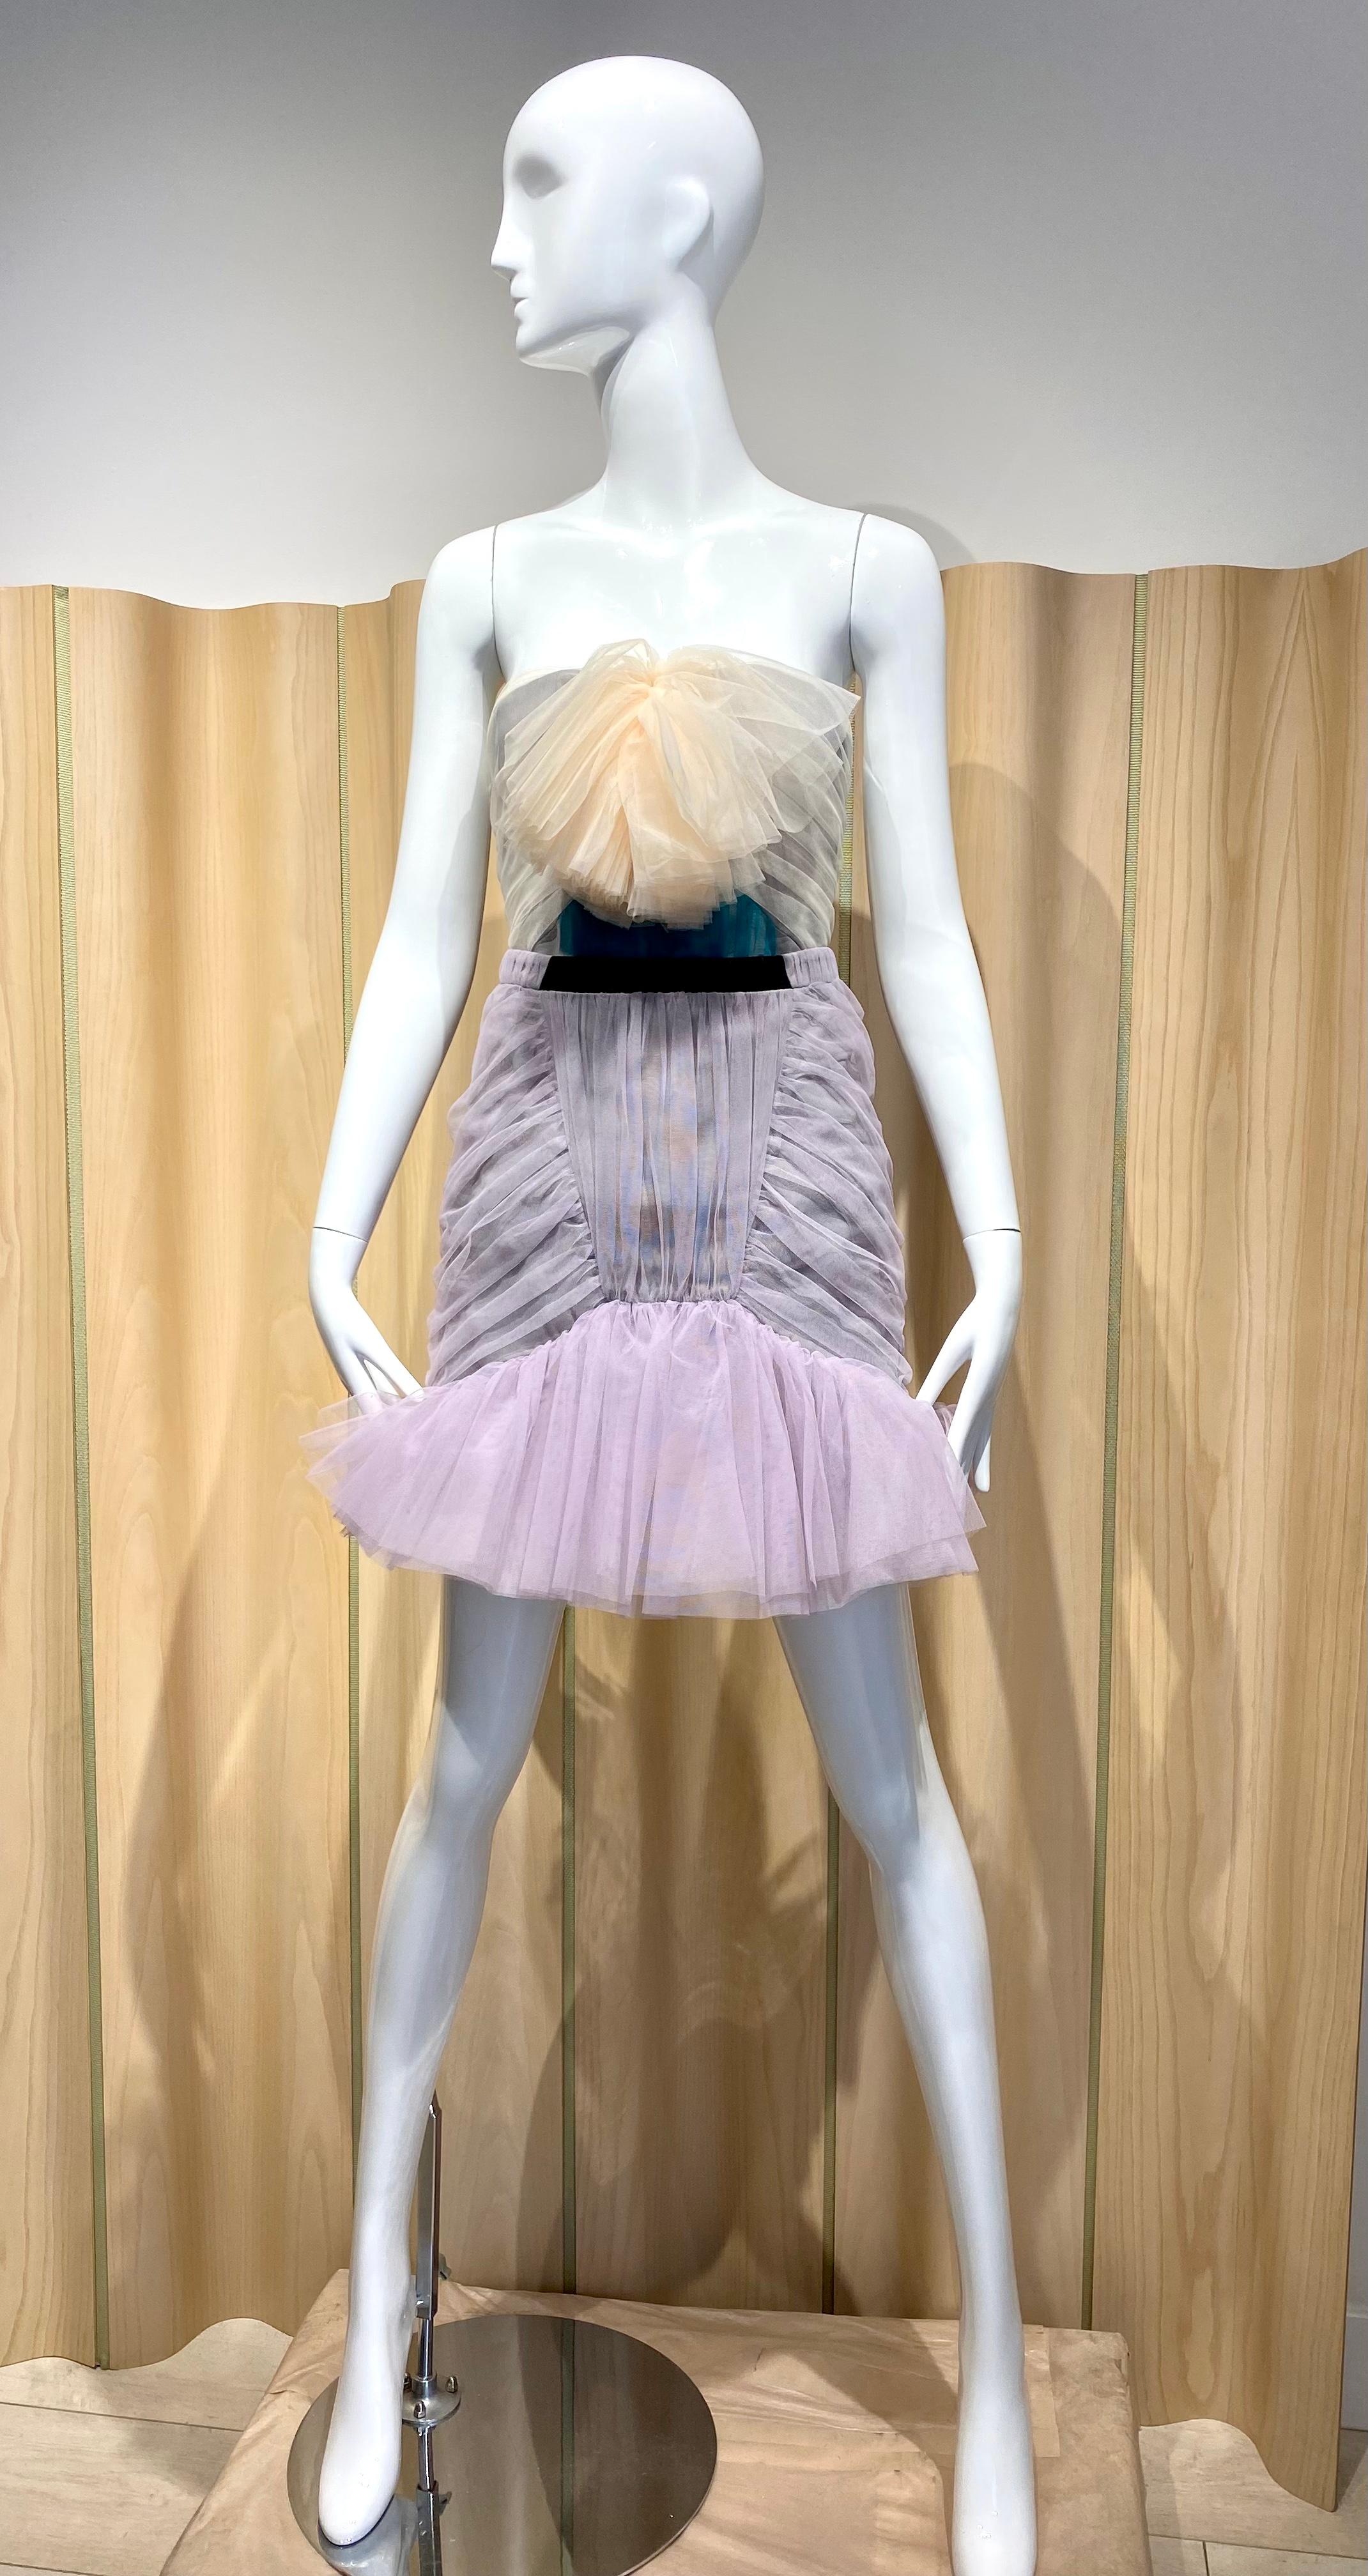 2011 Runway  Viktor & Rolf lavender, creme, gray, teal  and black tulle bustier and mini skirt.
Bustier Measurement: 
Bust 31” stretch to 34”
Waist 26” stretch to 27”
Hip: 34”

Skirt Measurement:
Waist: 30”  / Hip 36’ stretch to 38” / Skirt length: